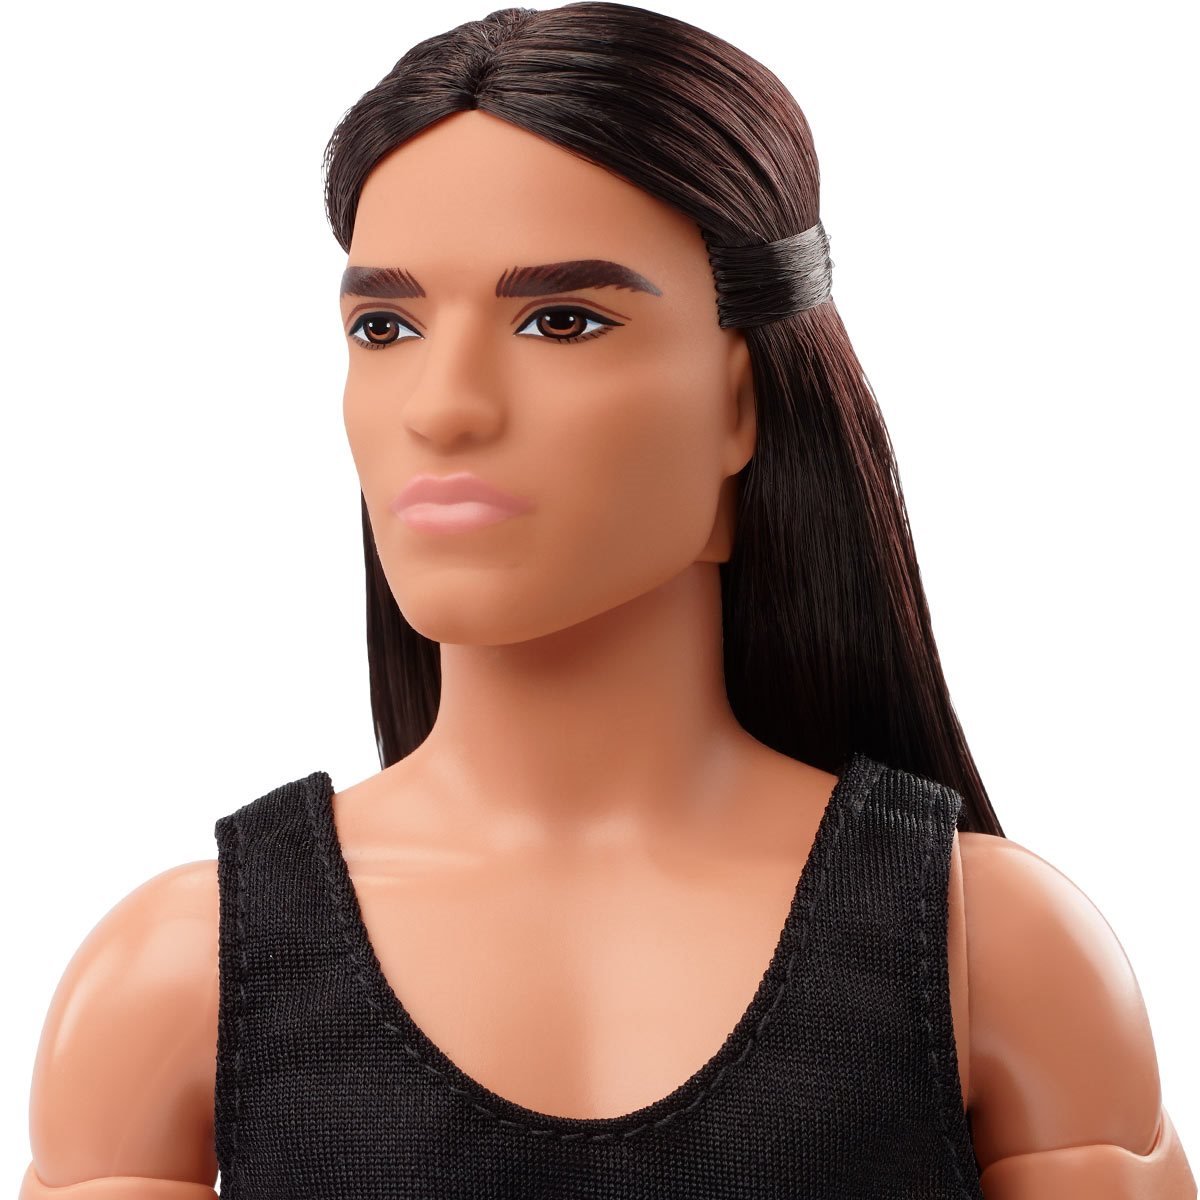 Barbie Looks Ken #9 Doll with Long Hair - Entertainment Earth